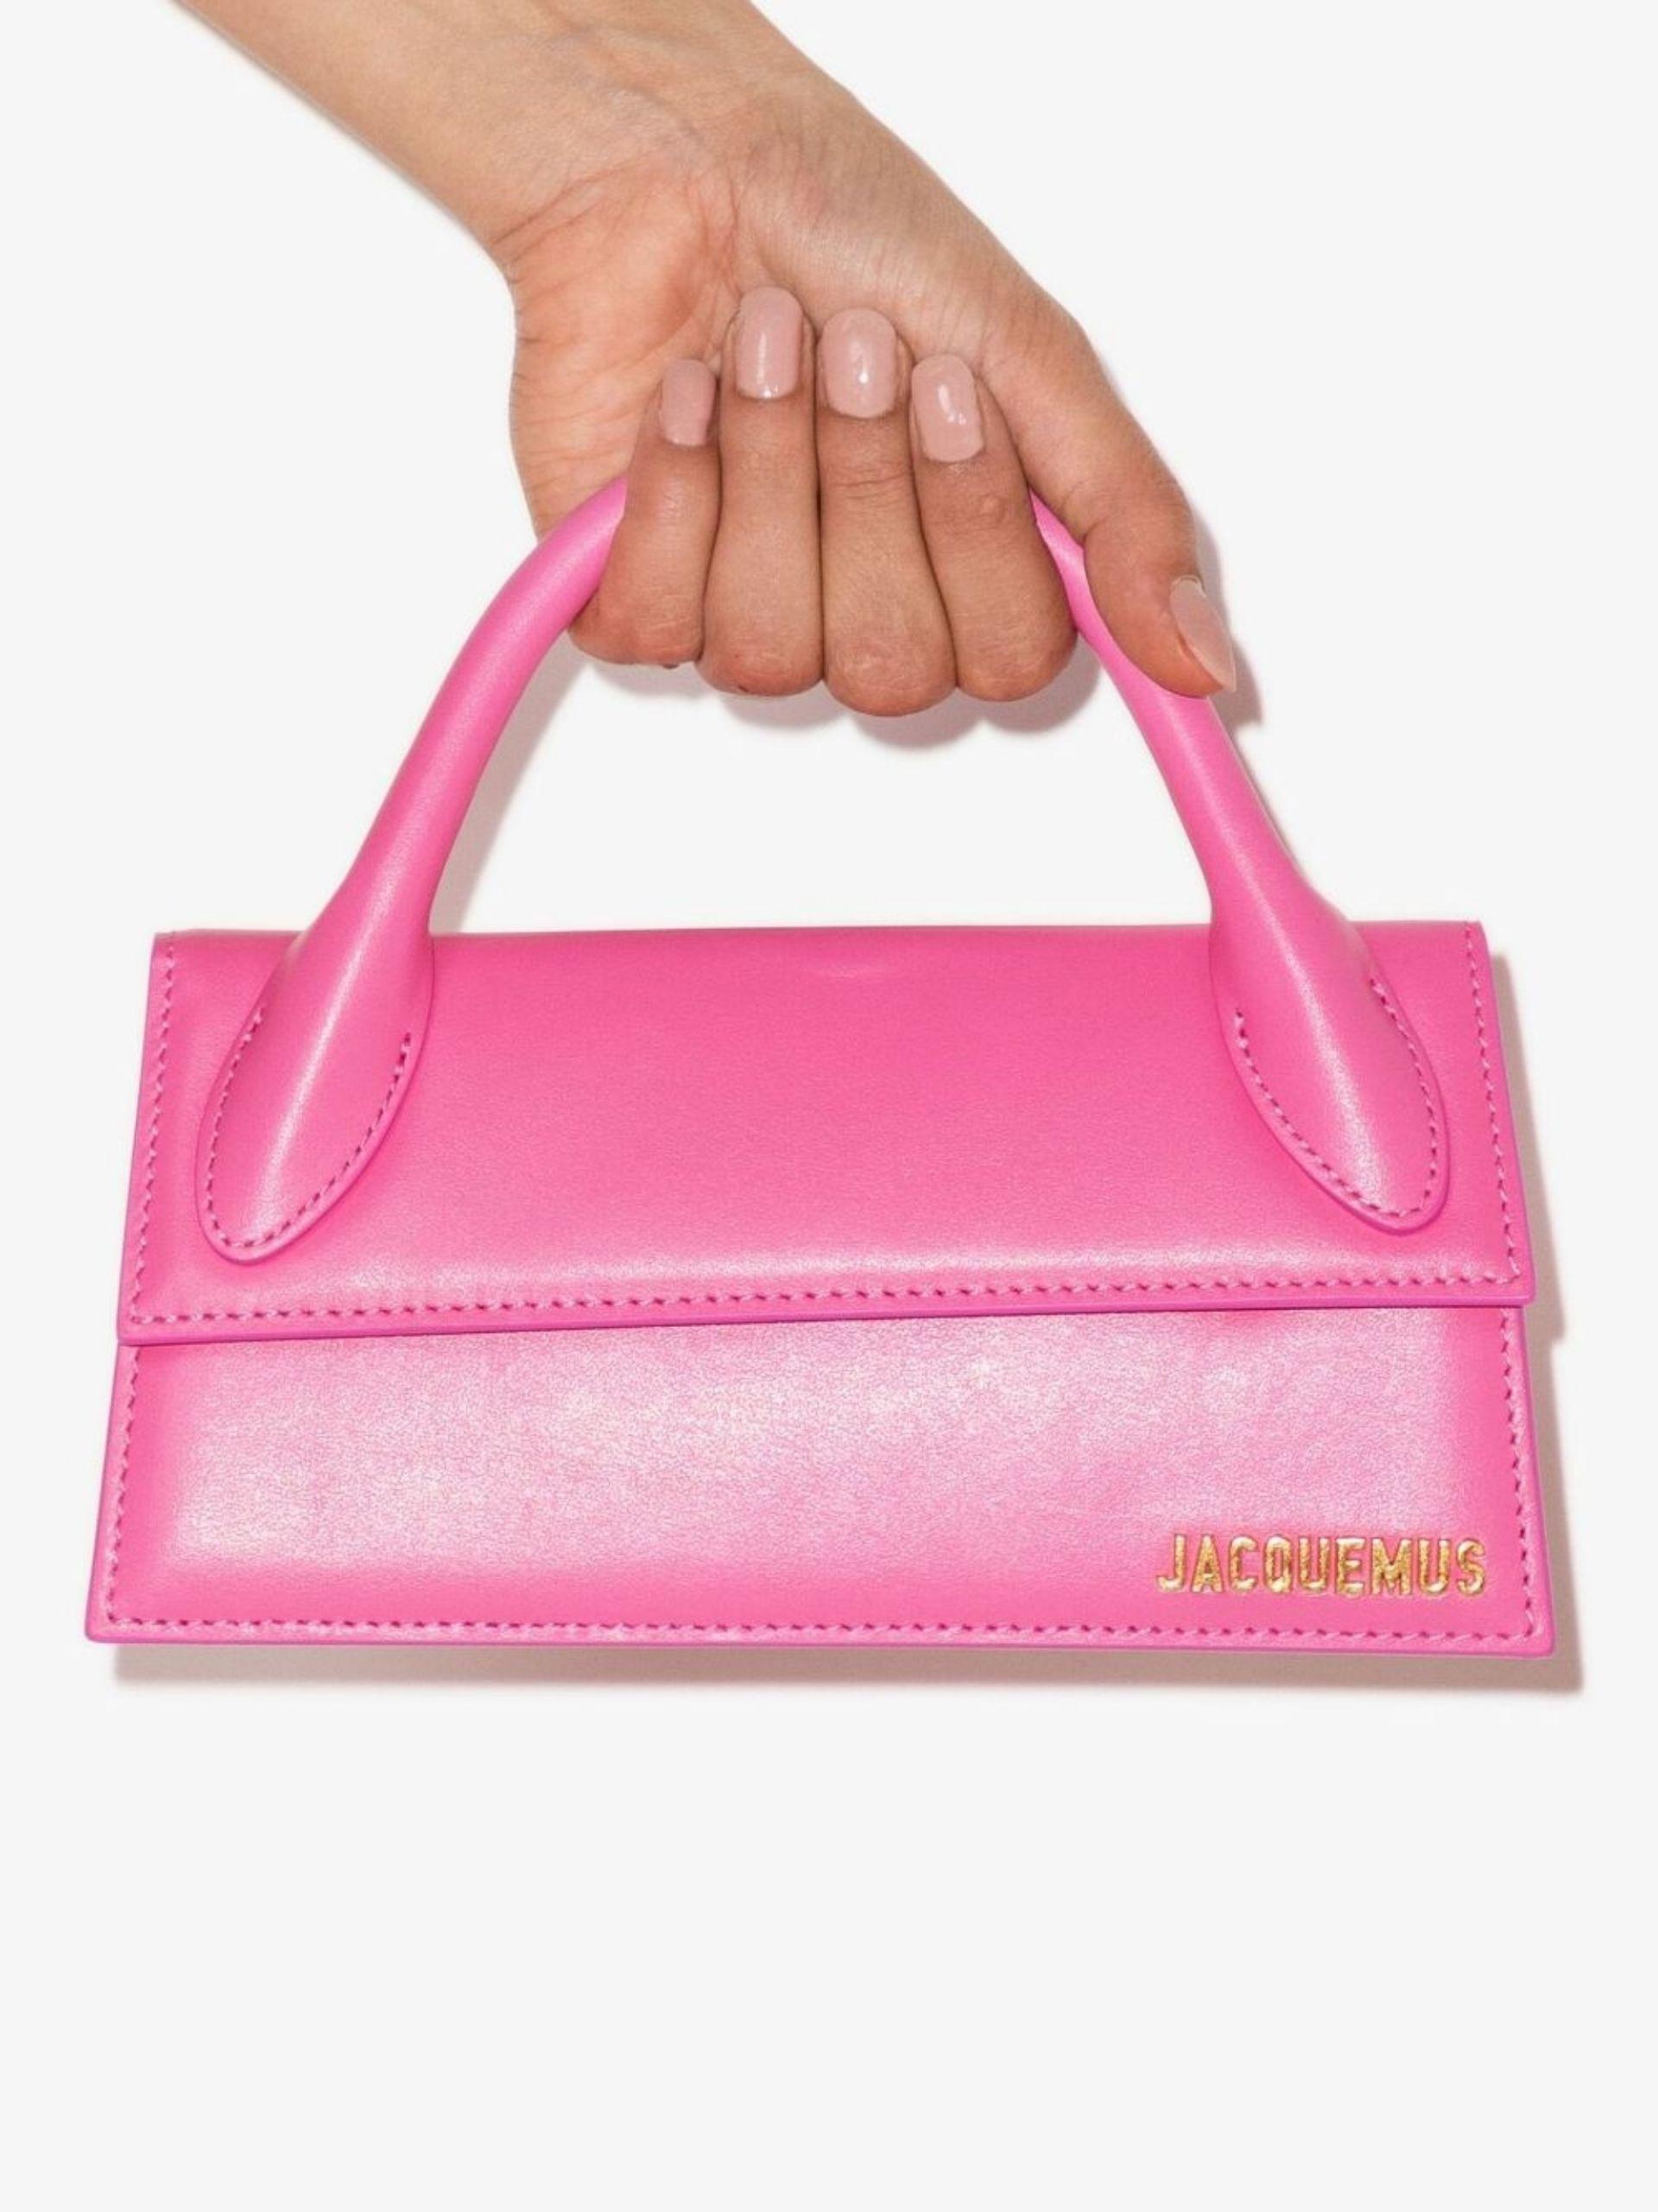 Jacquemus Le Chiquito Long Leather Tote Bag in Pink | Lyst